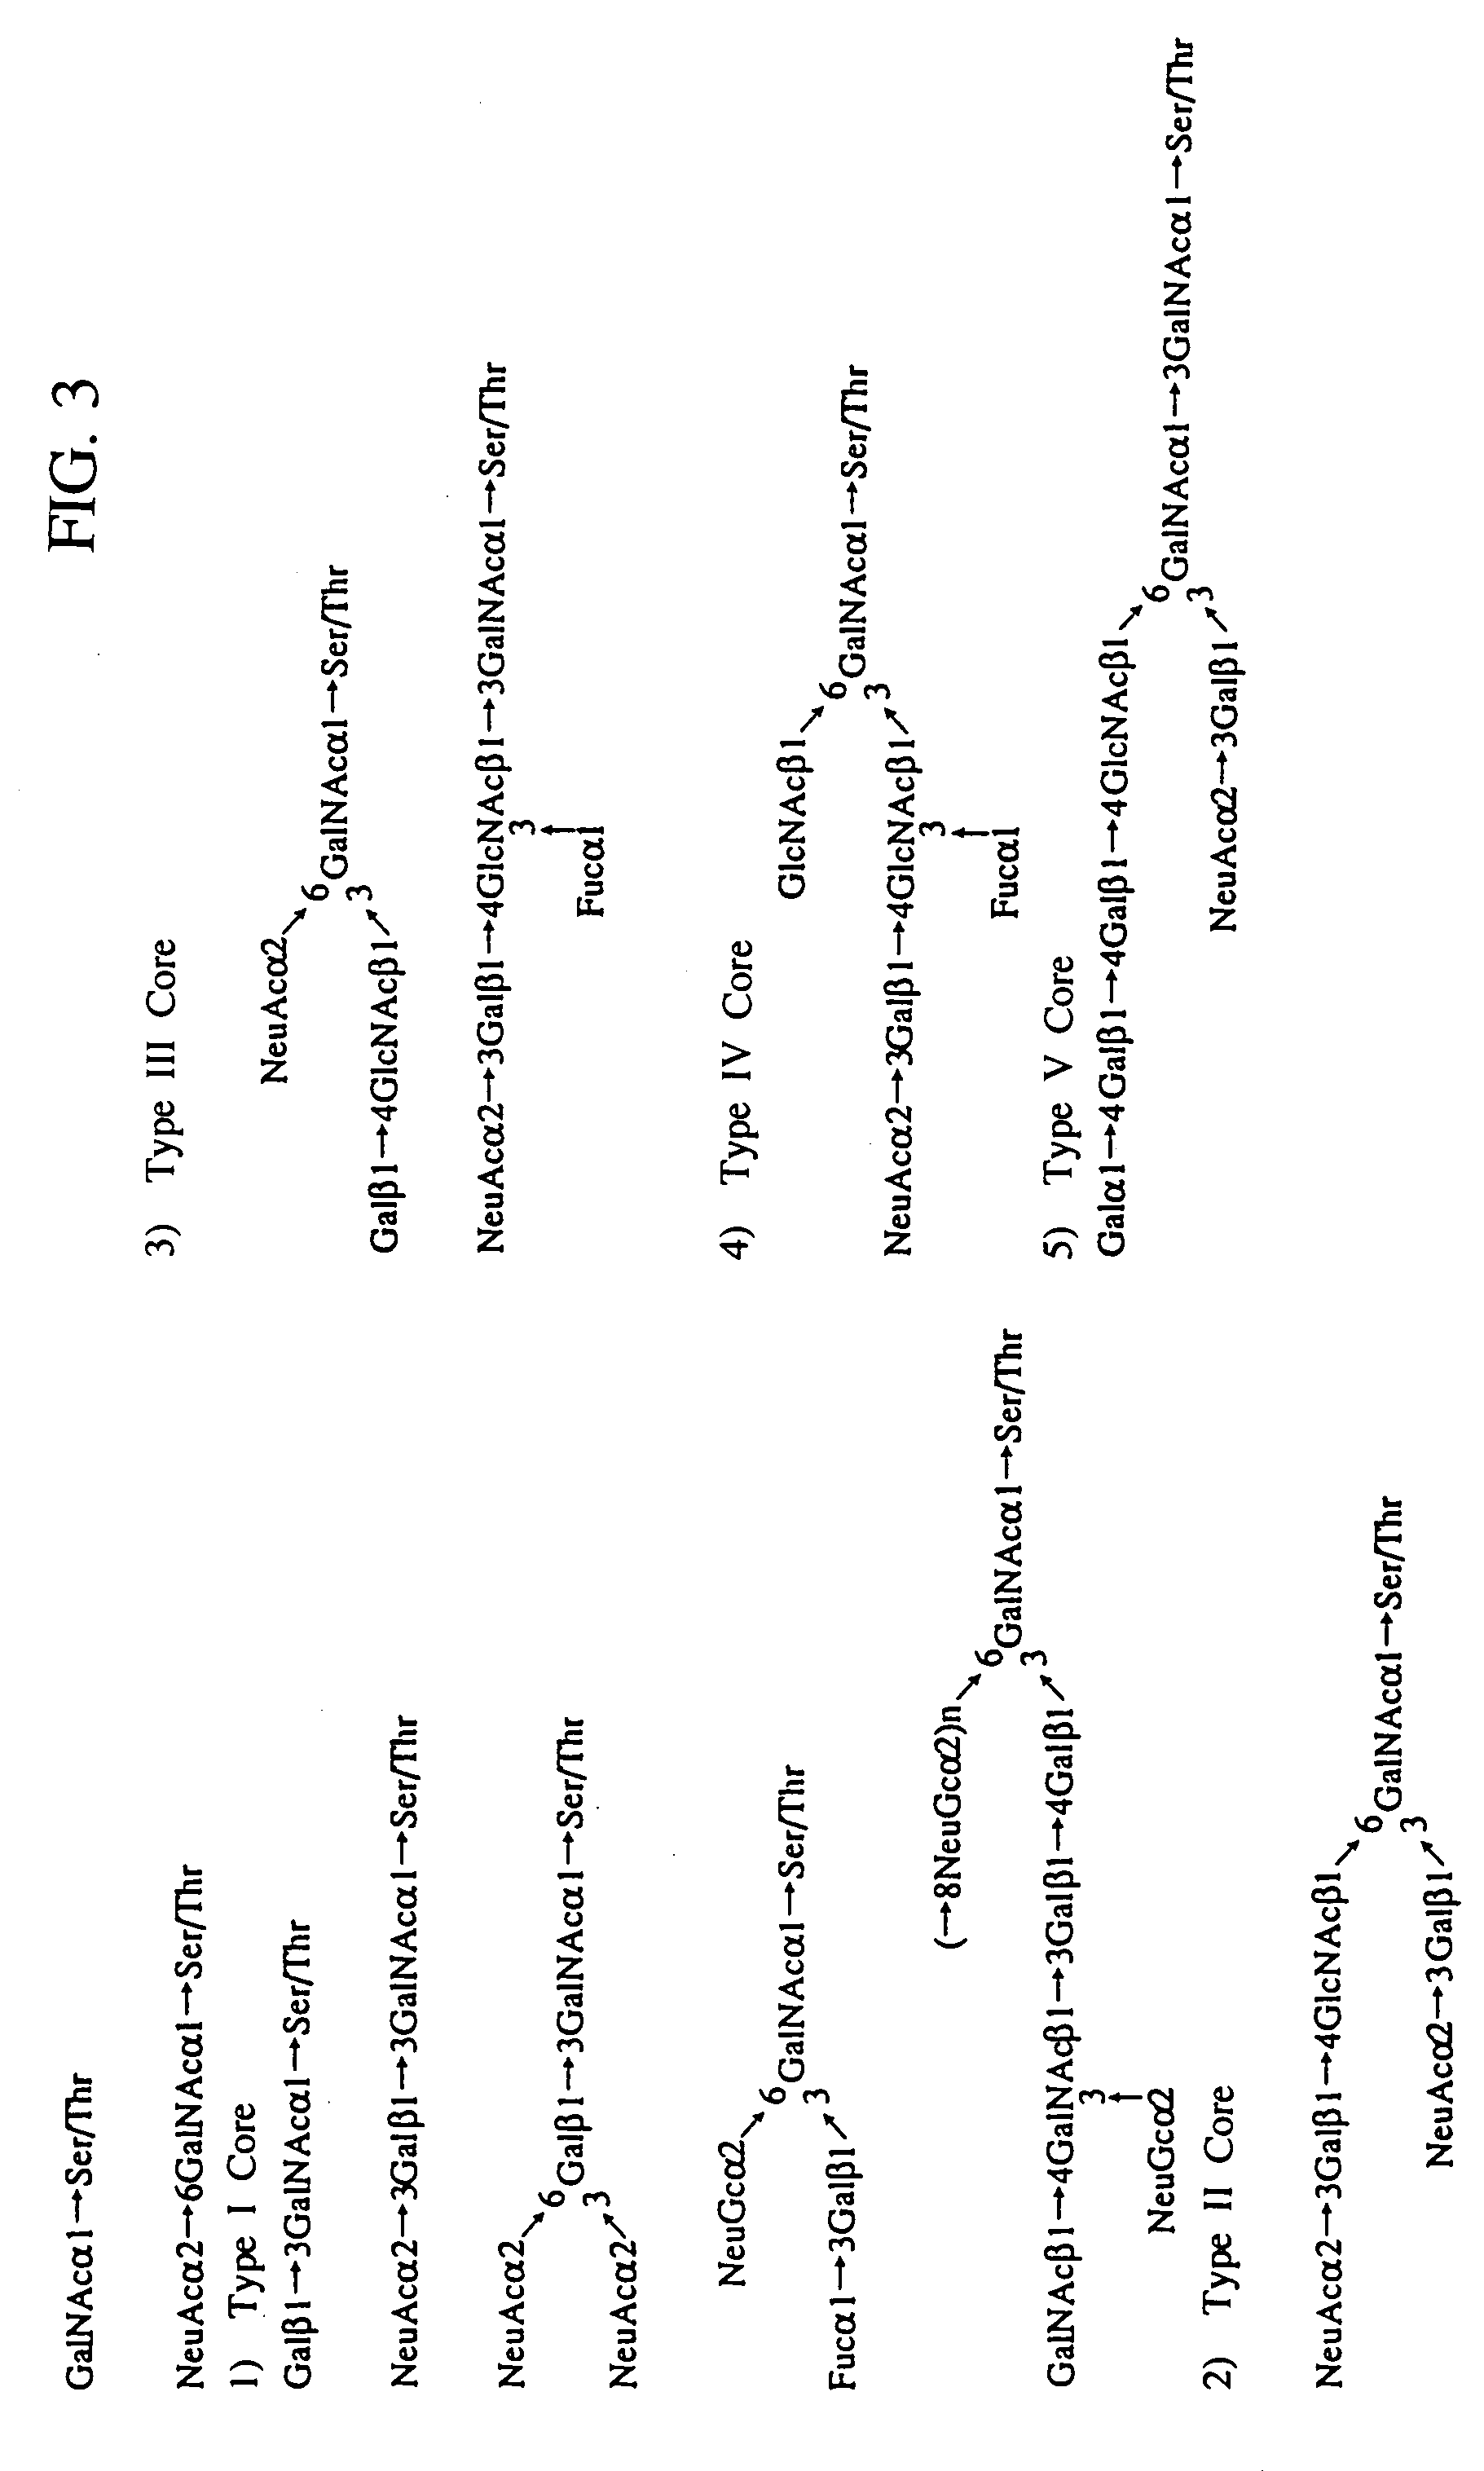 Heparin-binding proteins modified with sugar chains, method of producing the same and pharmaceutical compositions containing the same